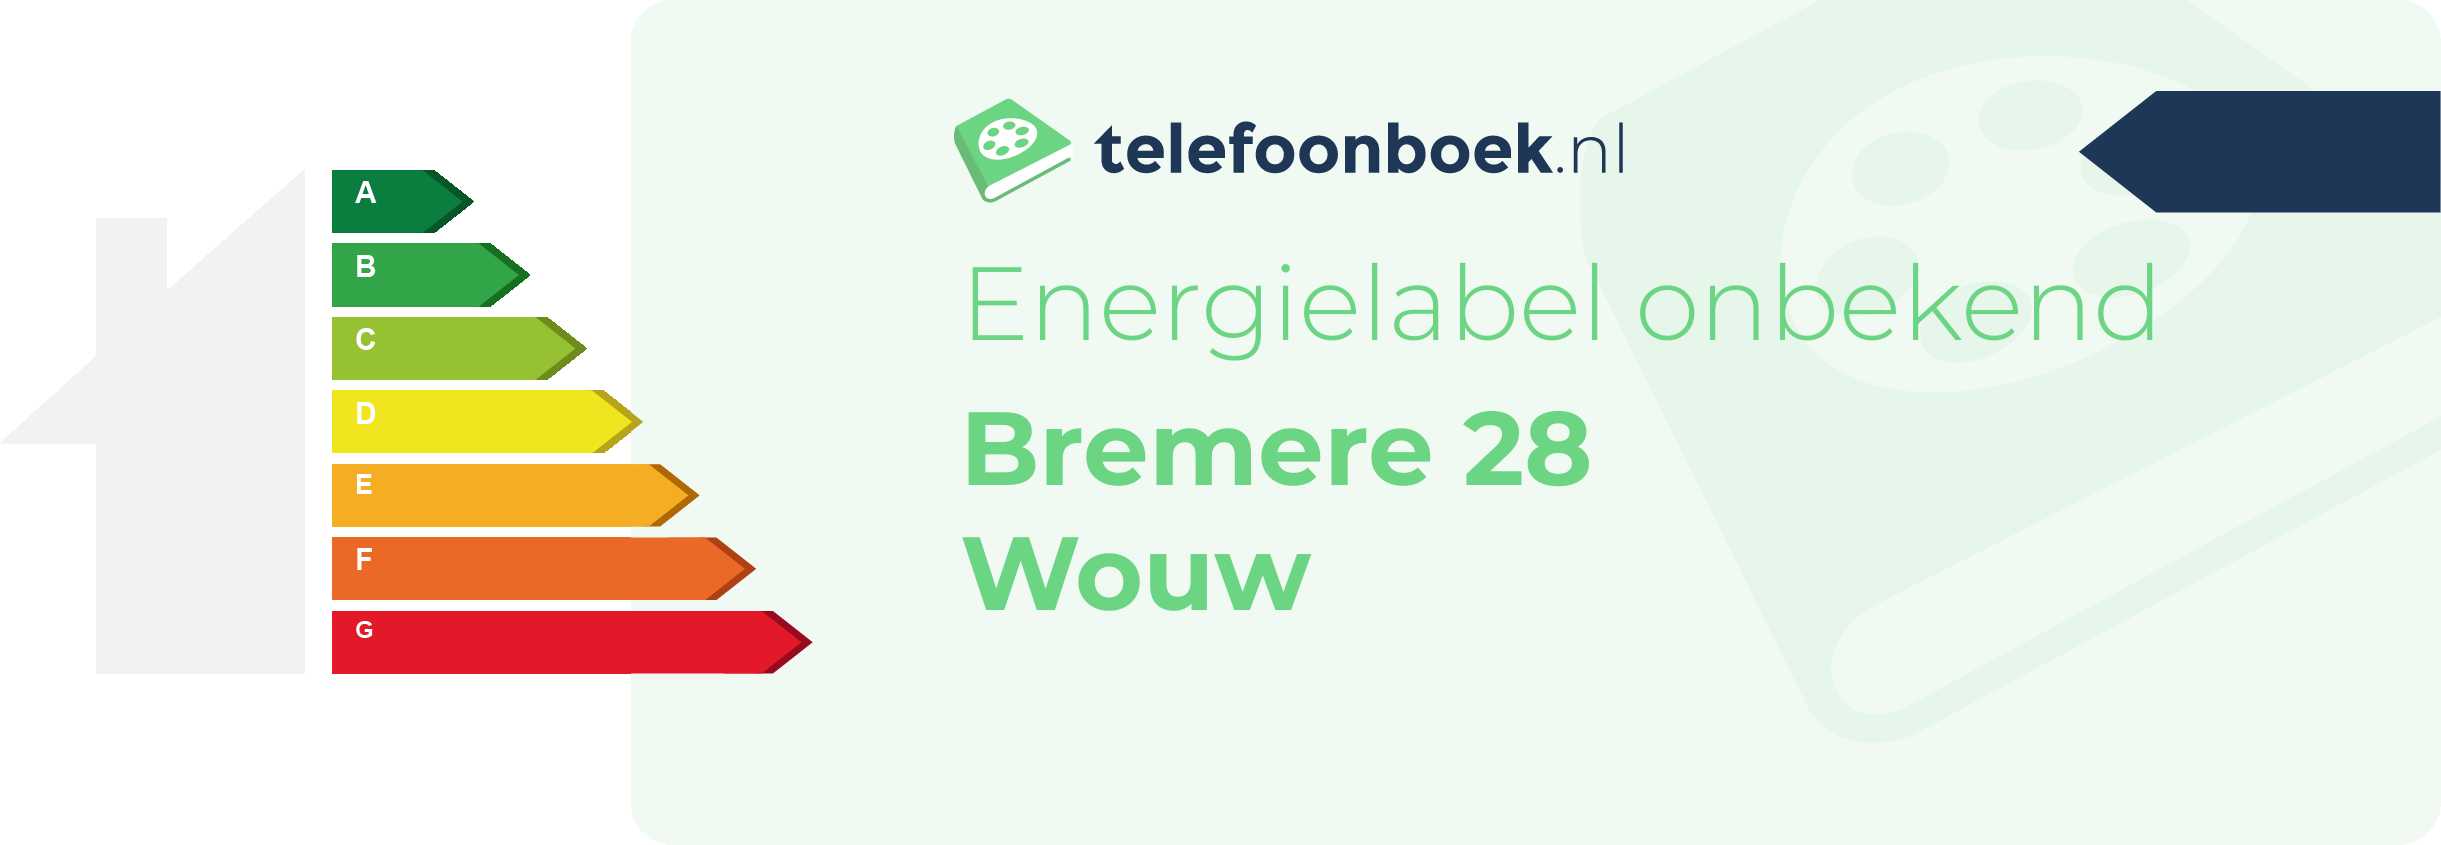 Energielabel Bremere 28 Wouw